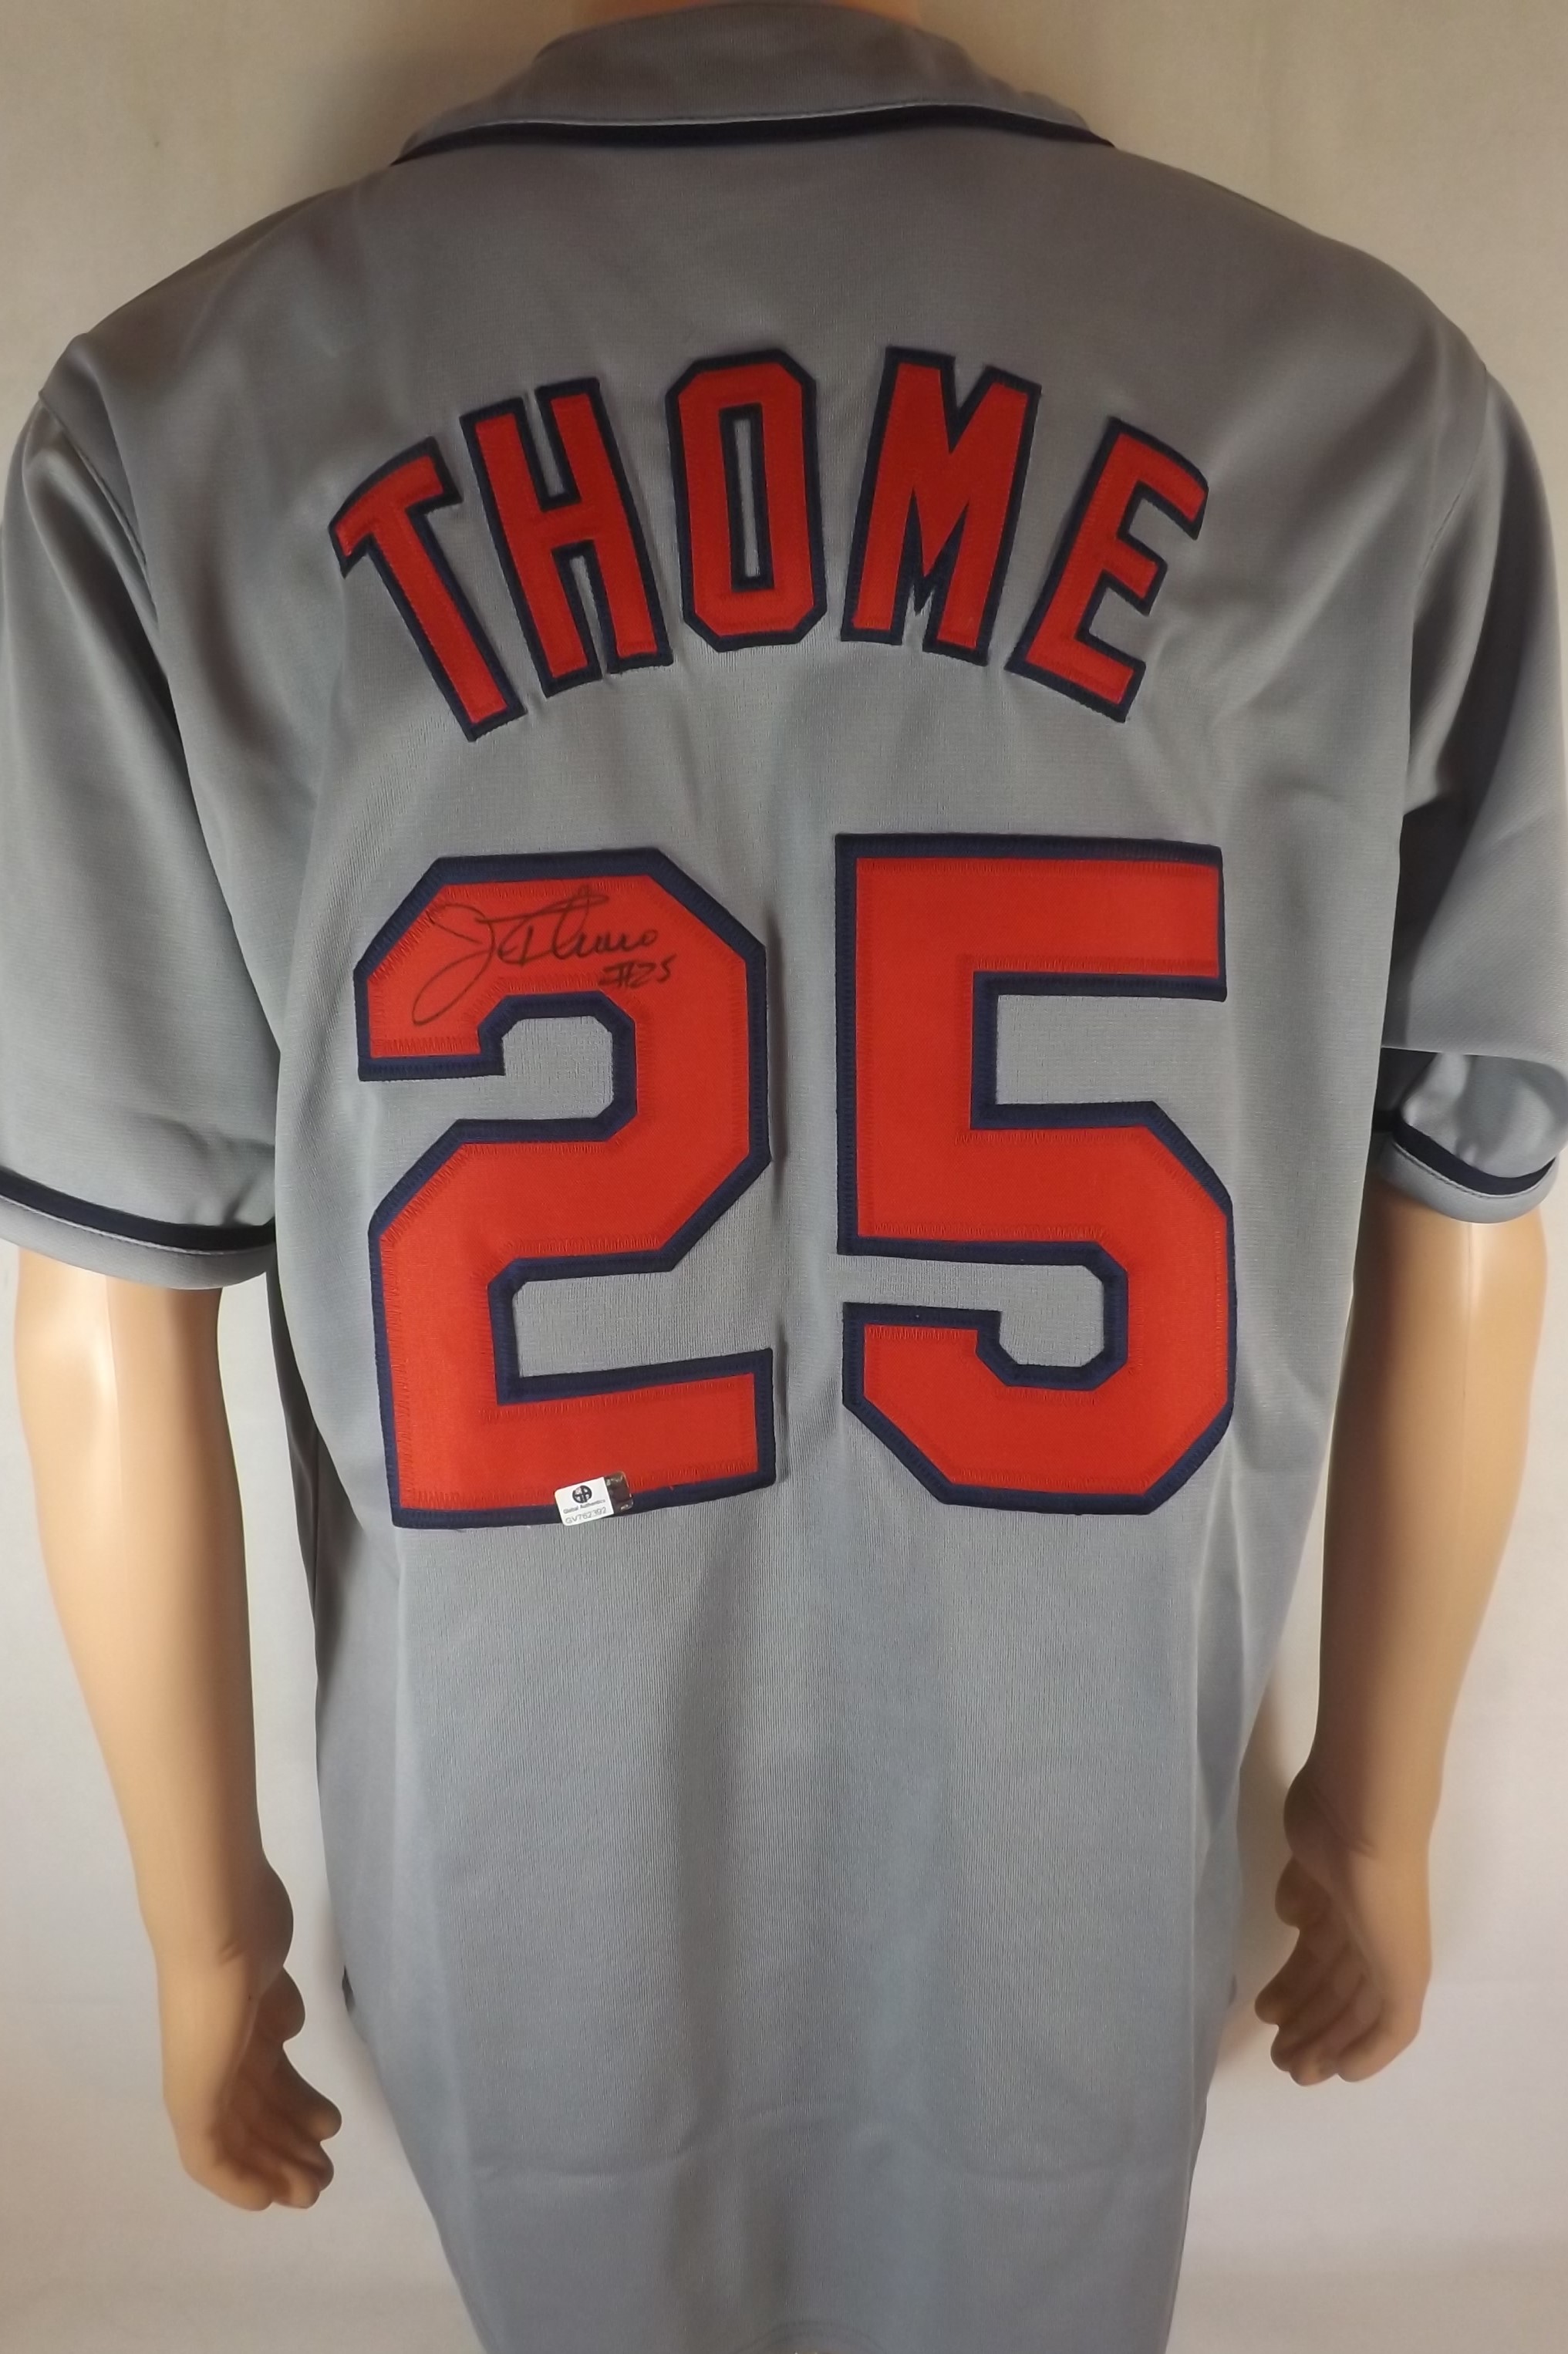 Jim Thome Signed Cleveland Indians Jersey (Beckett COA) 612 Home